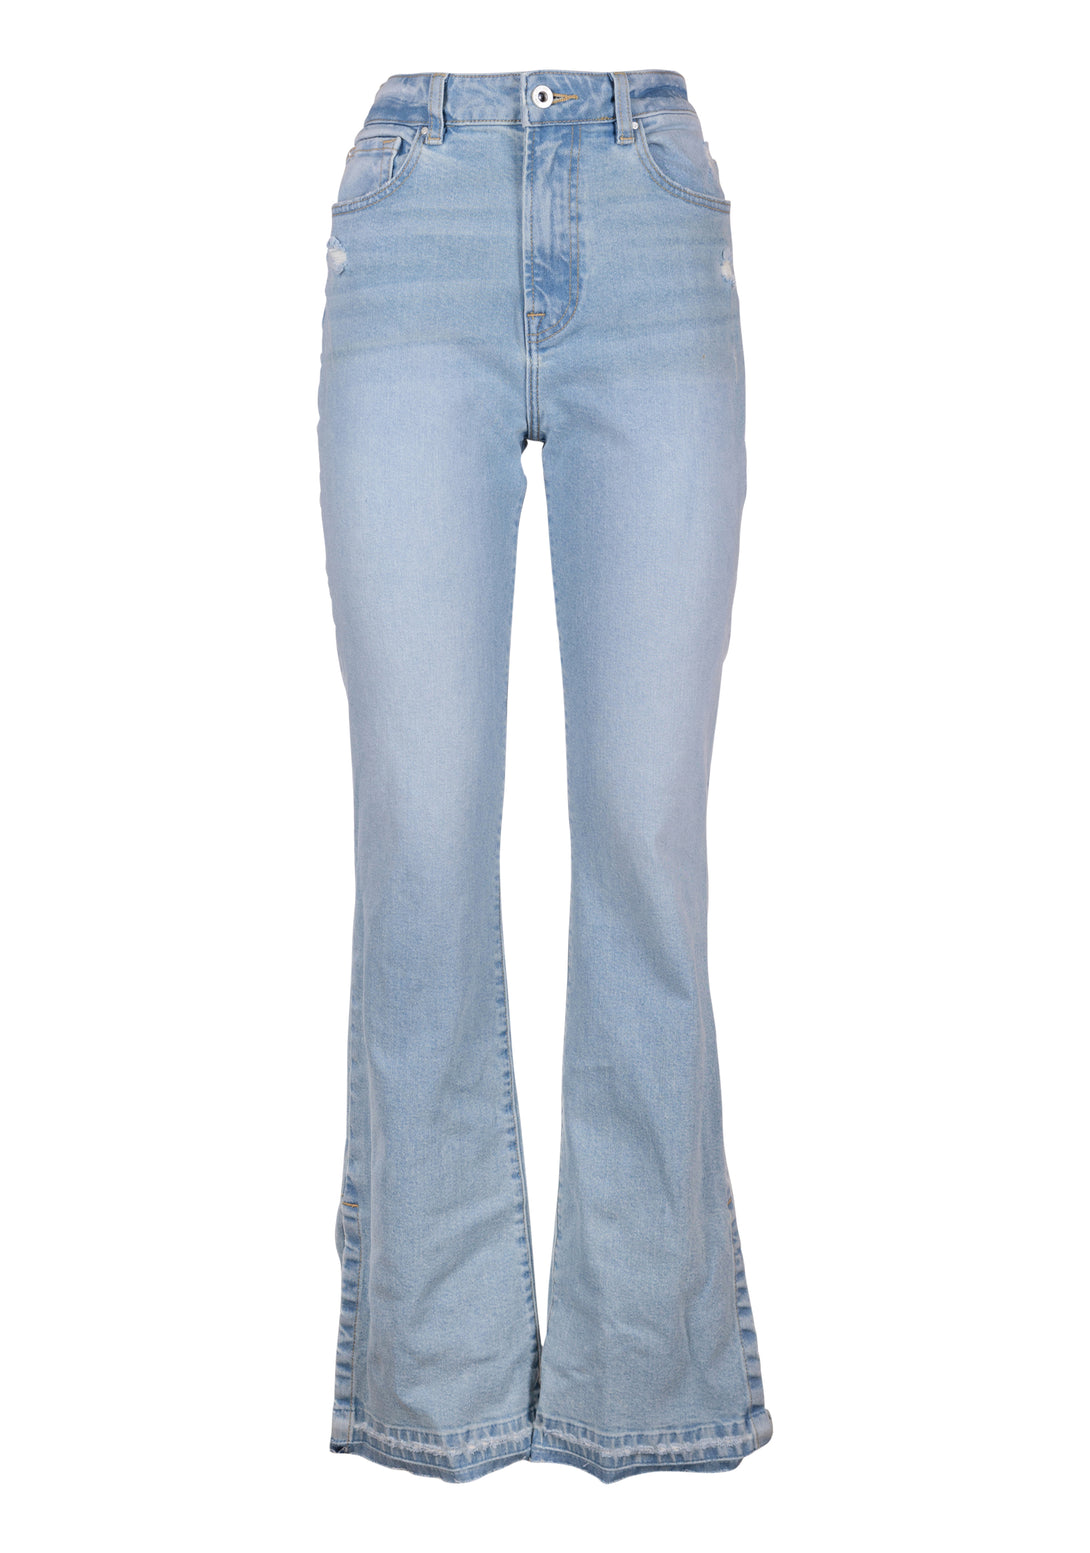 Jeans bootcut fit with push-up effect made in denim with bleached wash Fracomina FP23SV8020D40703-062-1